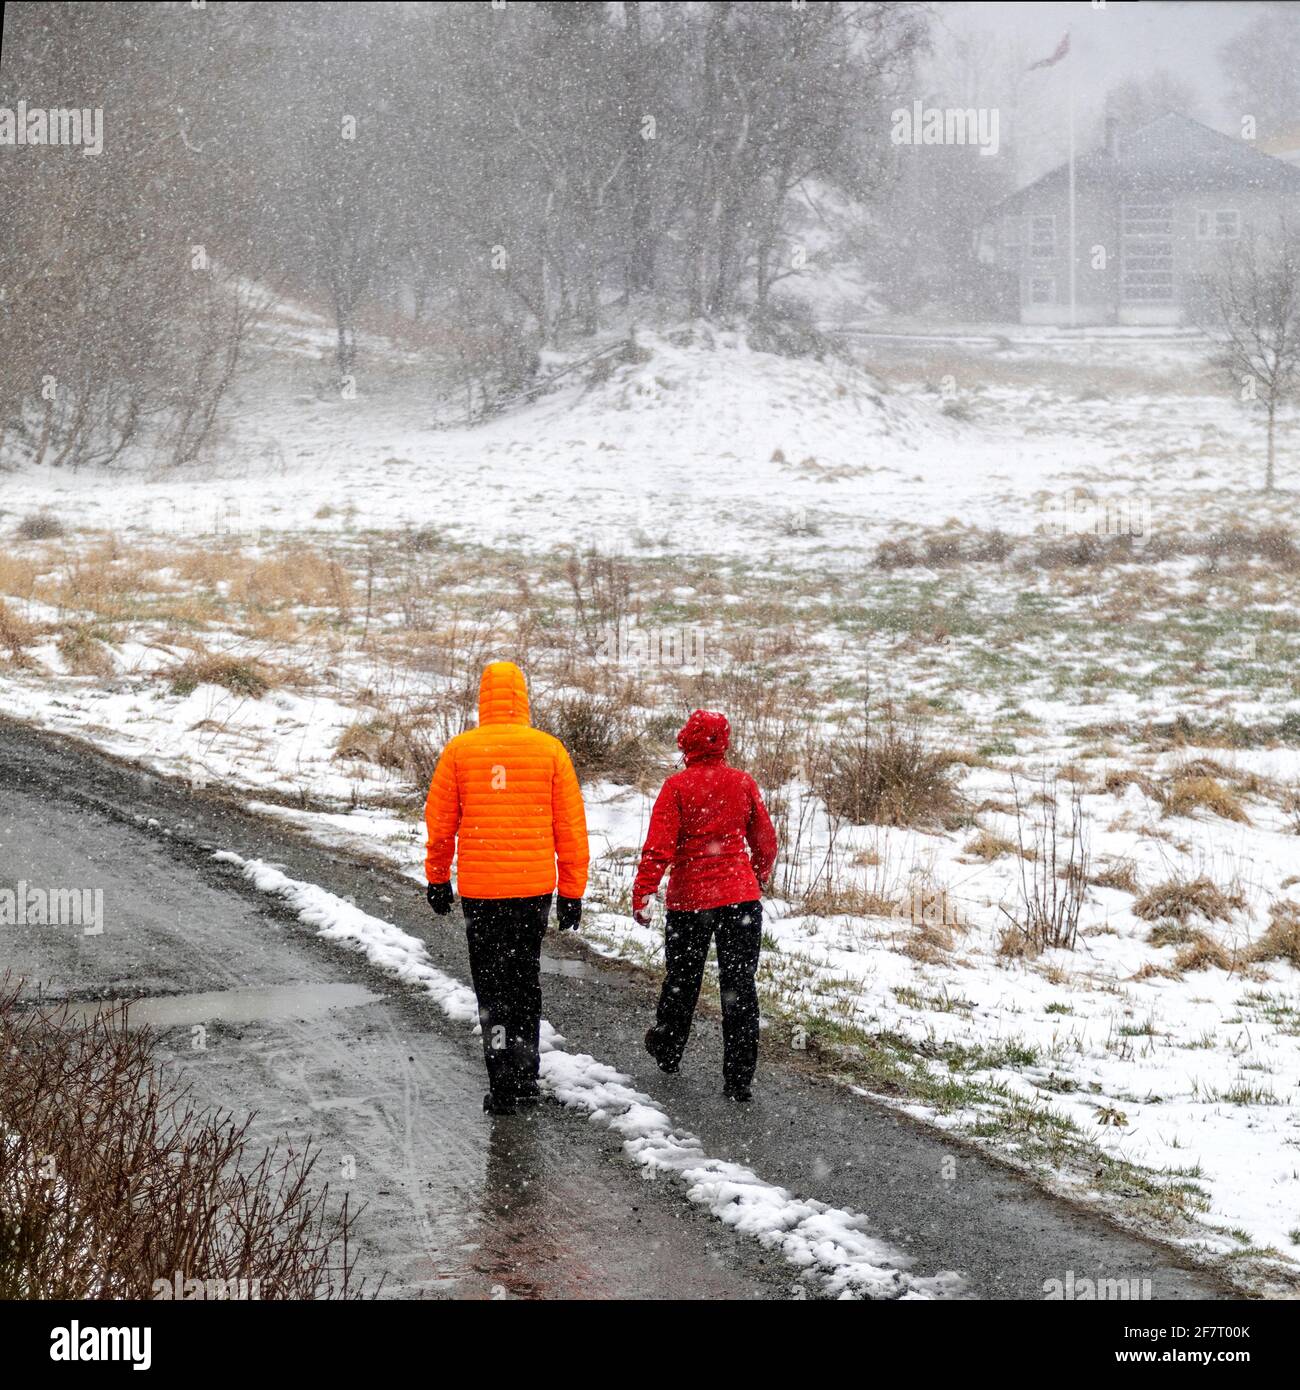 Two people walking on a path in snowy weather. Bergen, Norway Stock Photo